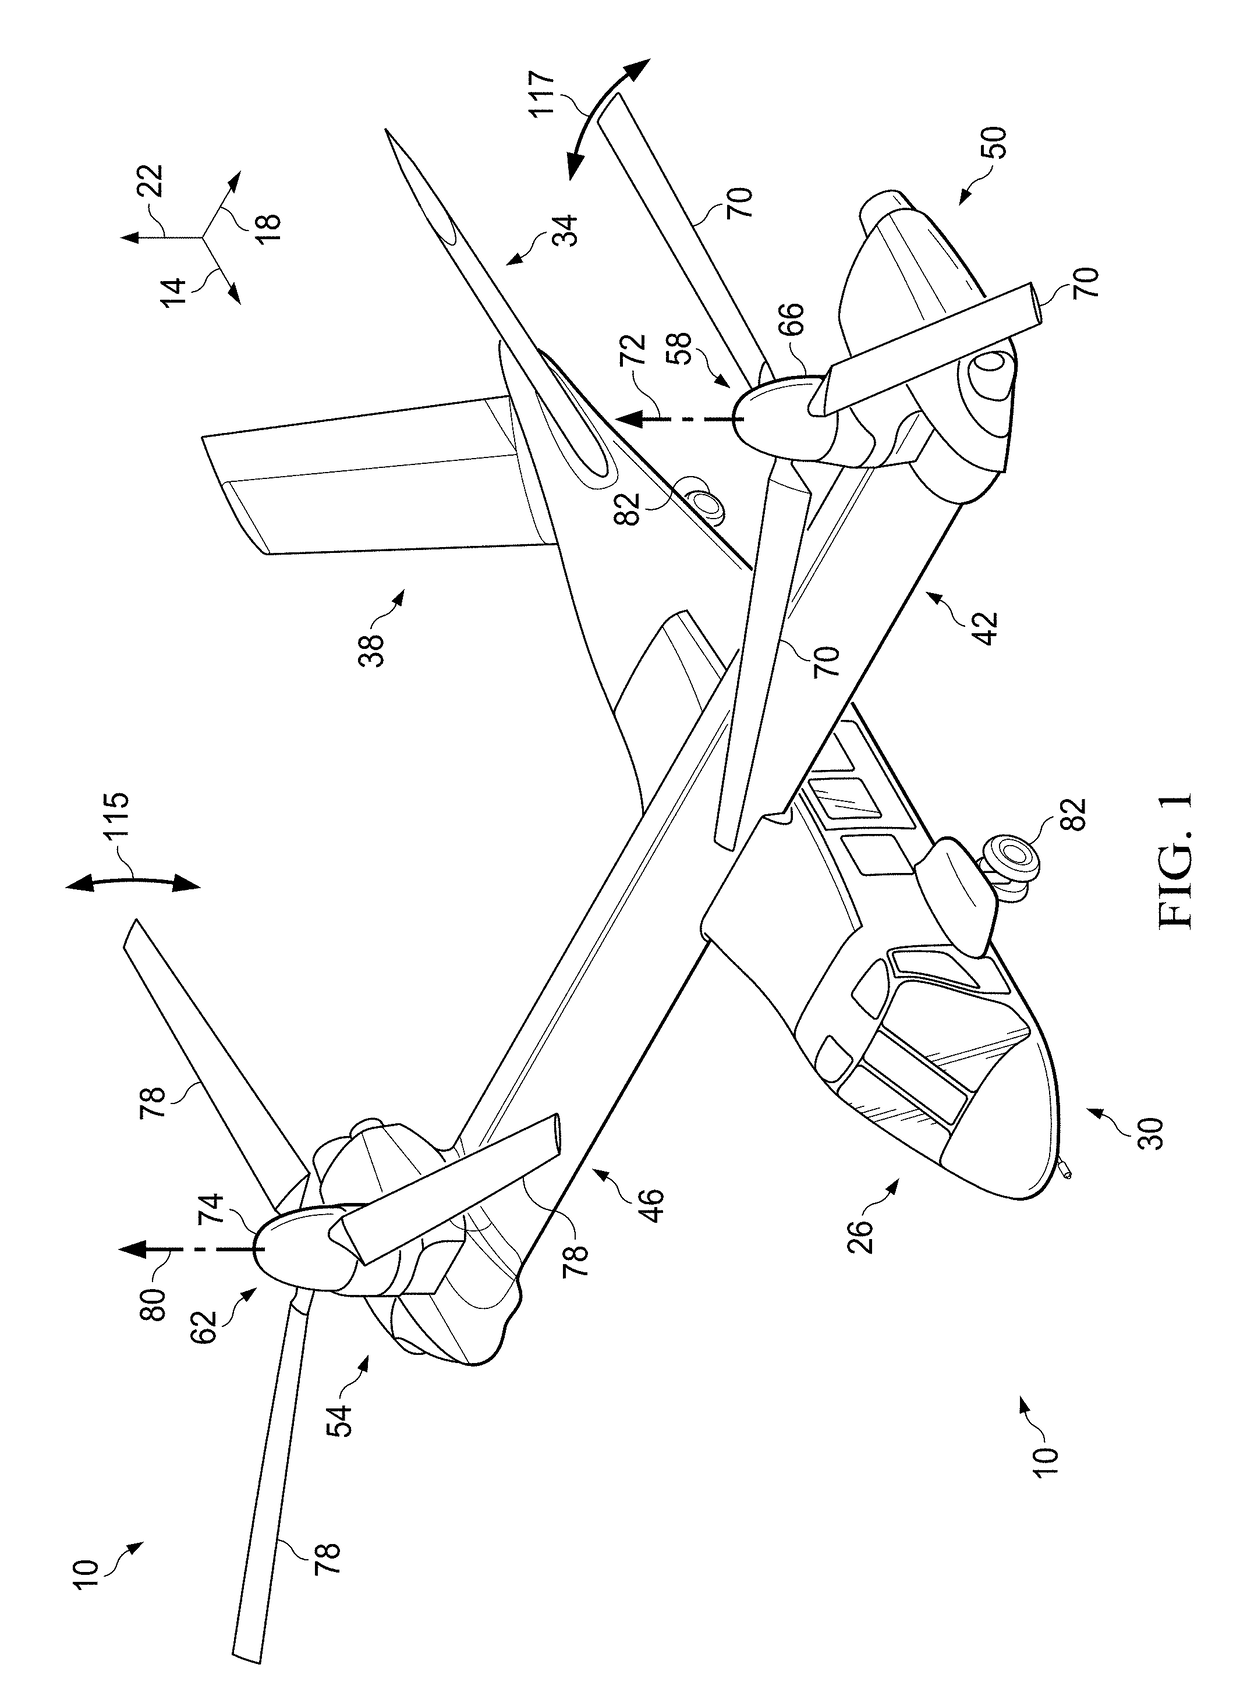 Methods of customizing, manufacturing, and repairing a rotor blade using additive manufacturing processes and a rotor blade incorporating the same